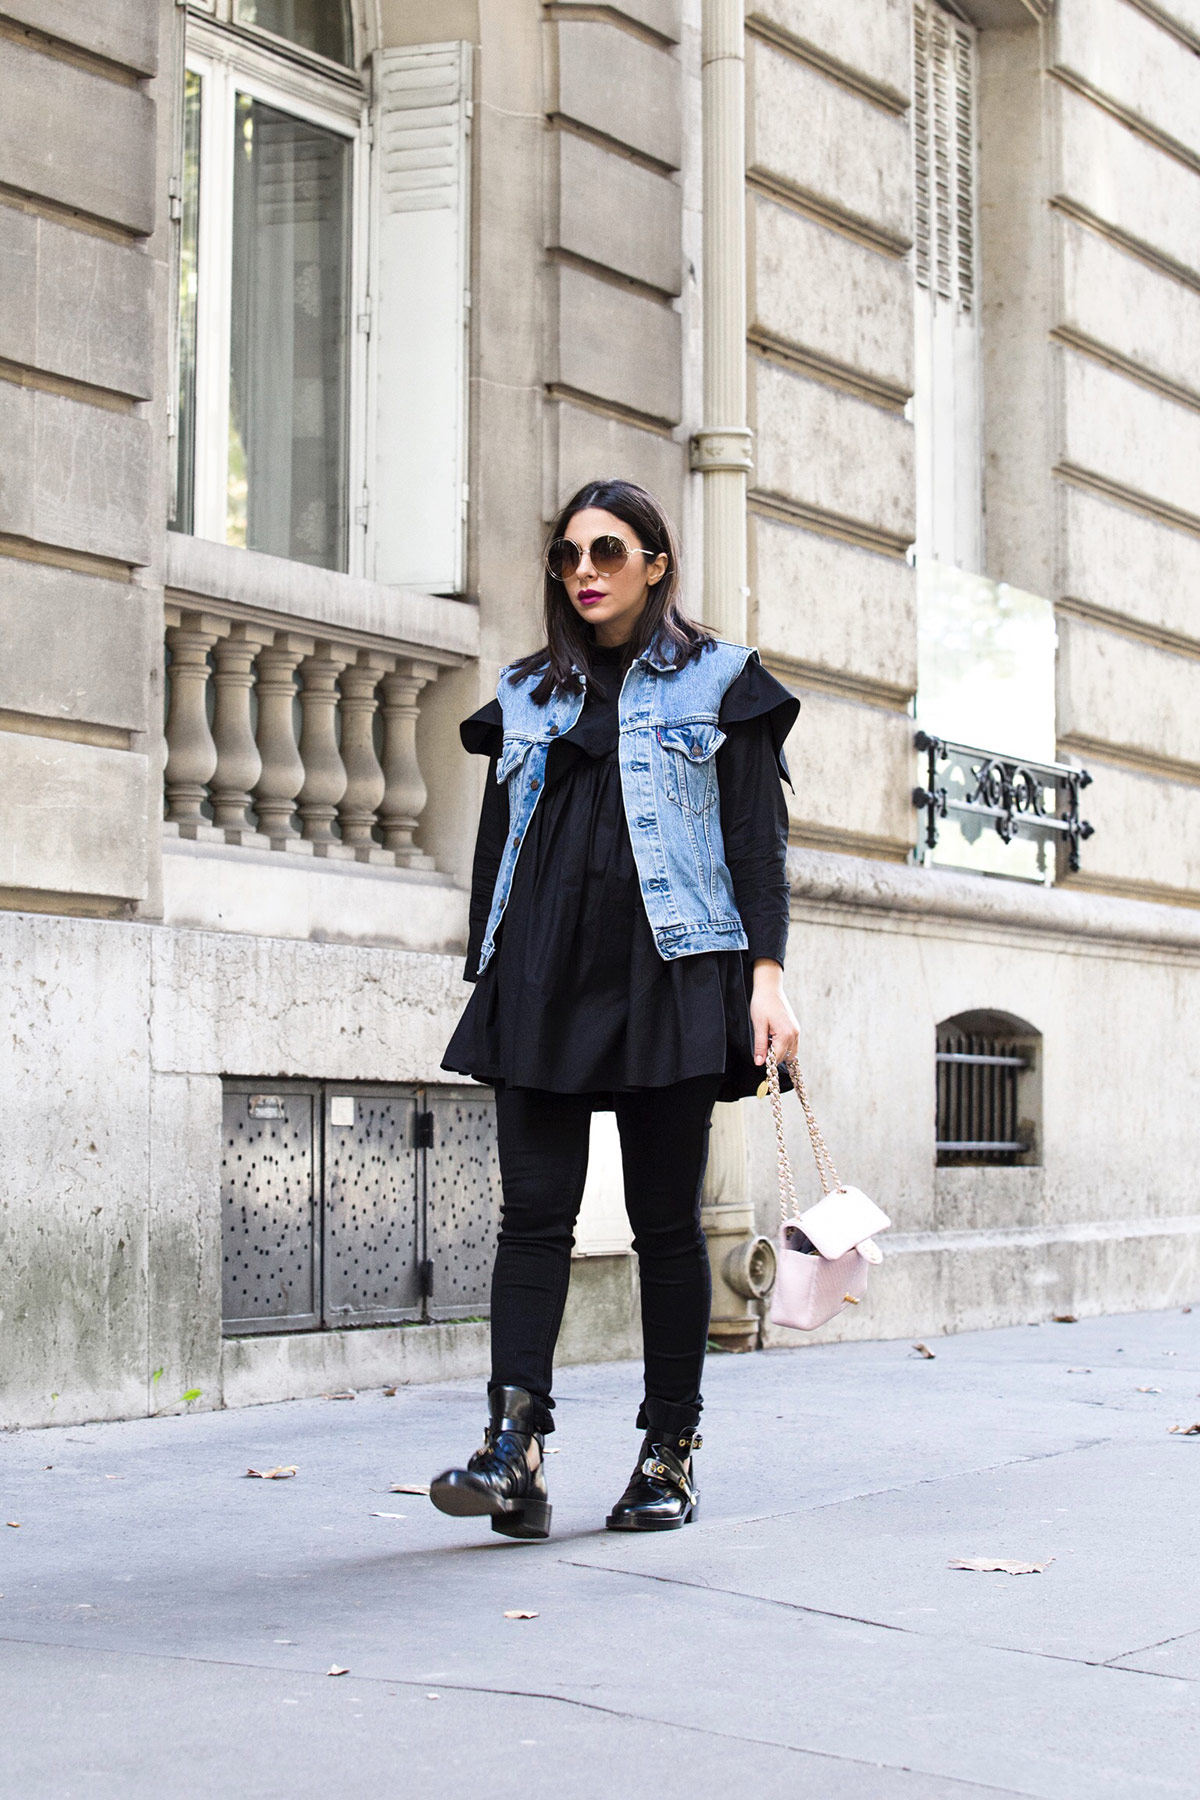 off-duty total black look with a pop of color by Stella Asteria - Lifestyle and Fashion Blogger - Paris Street Style inspiration, pregnancy style and how to dress the bump